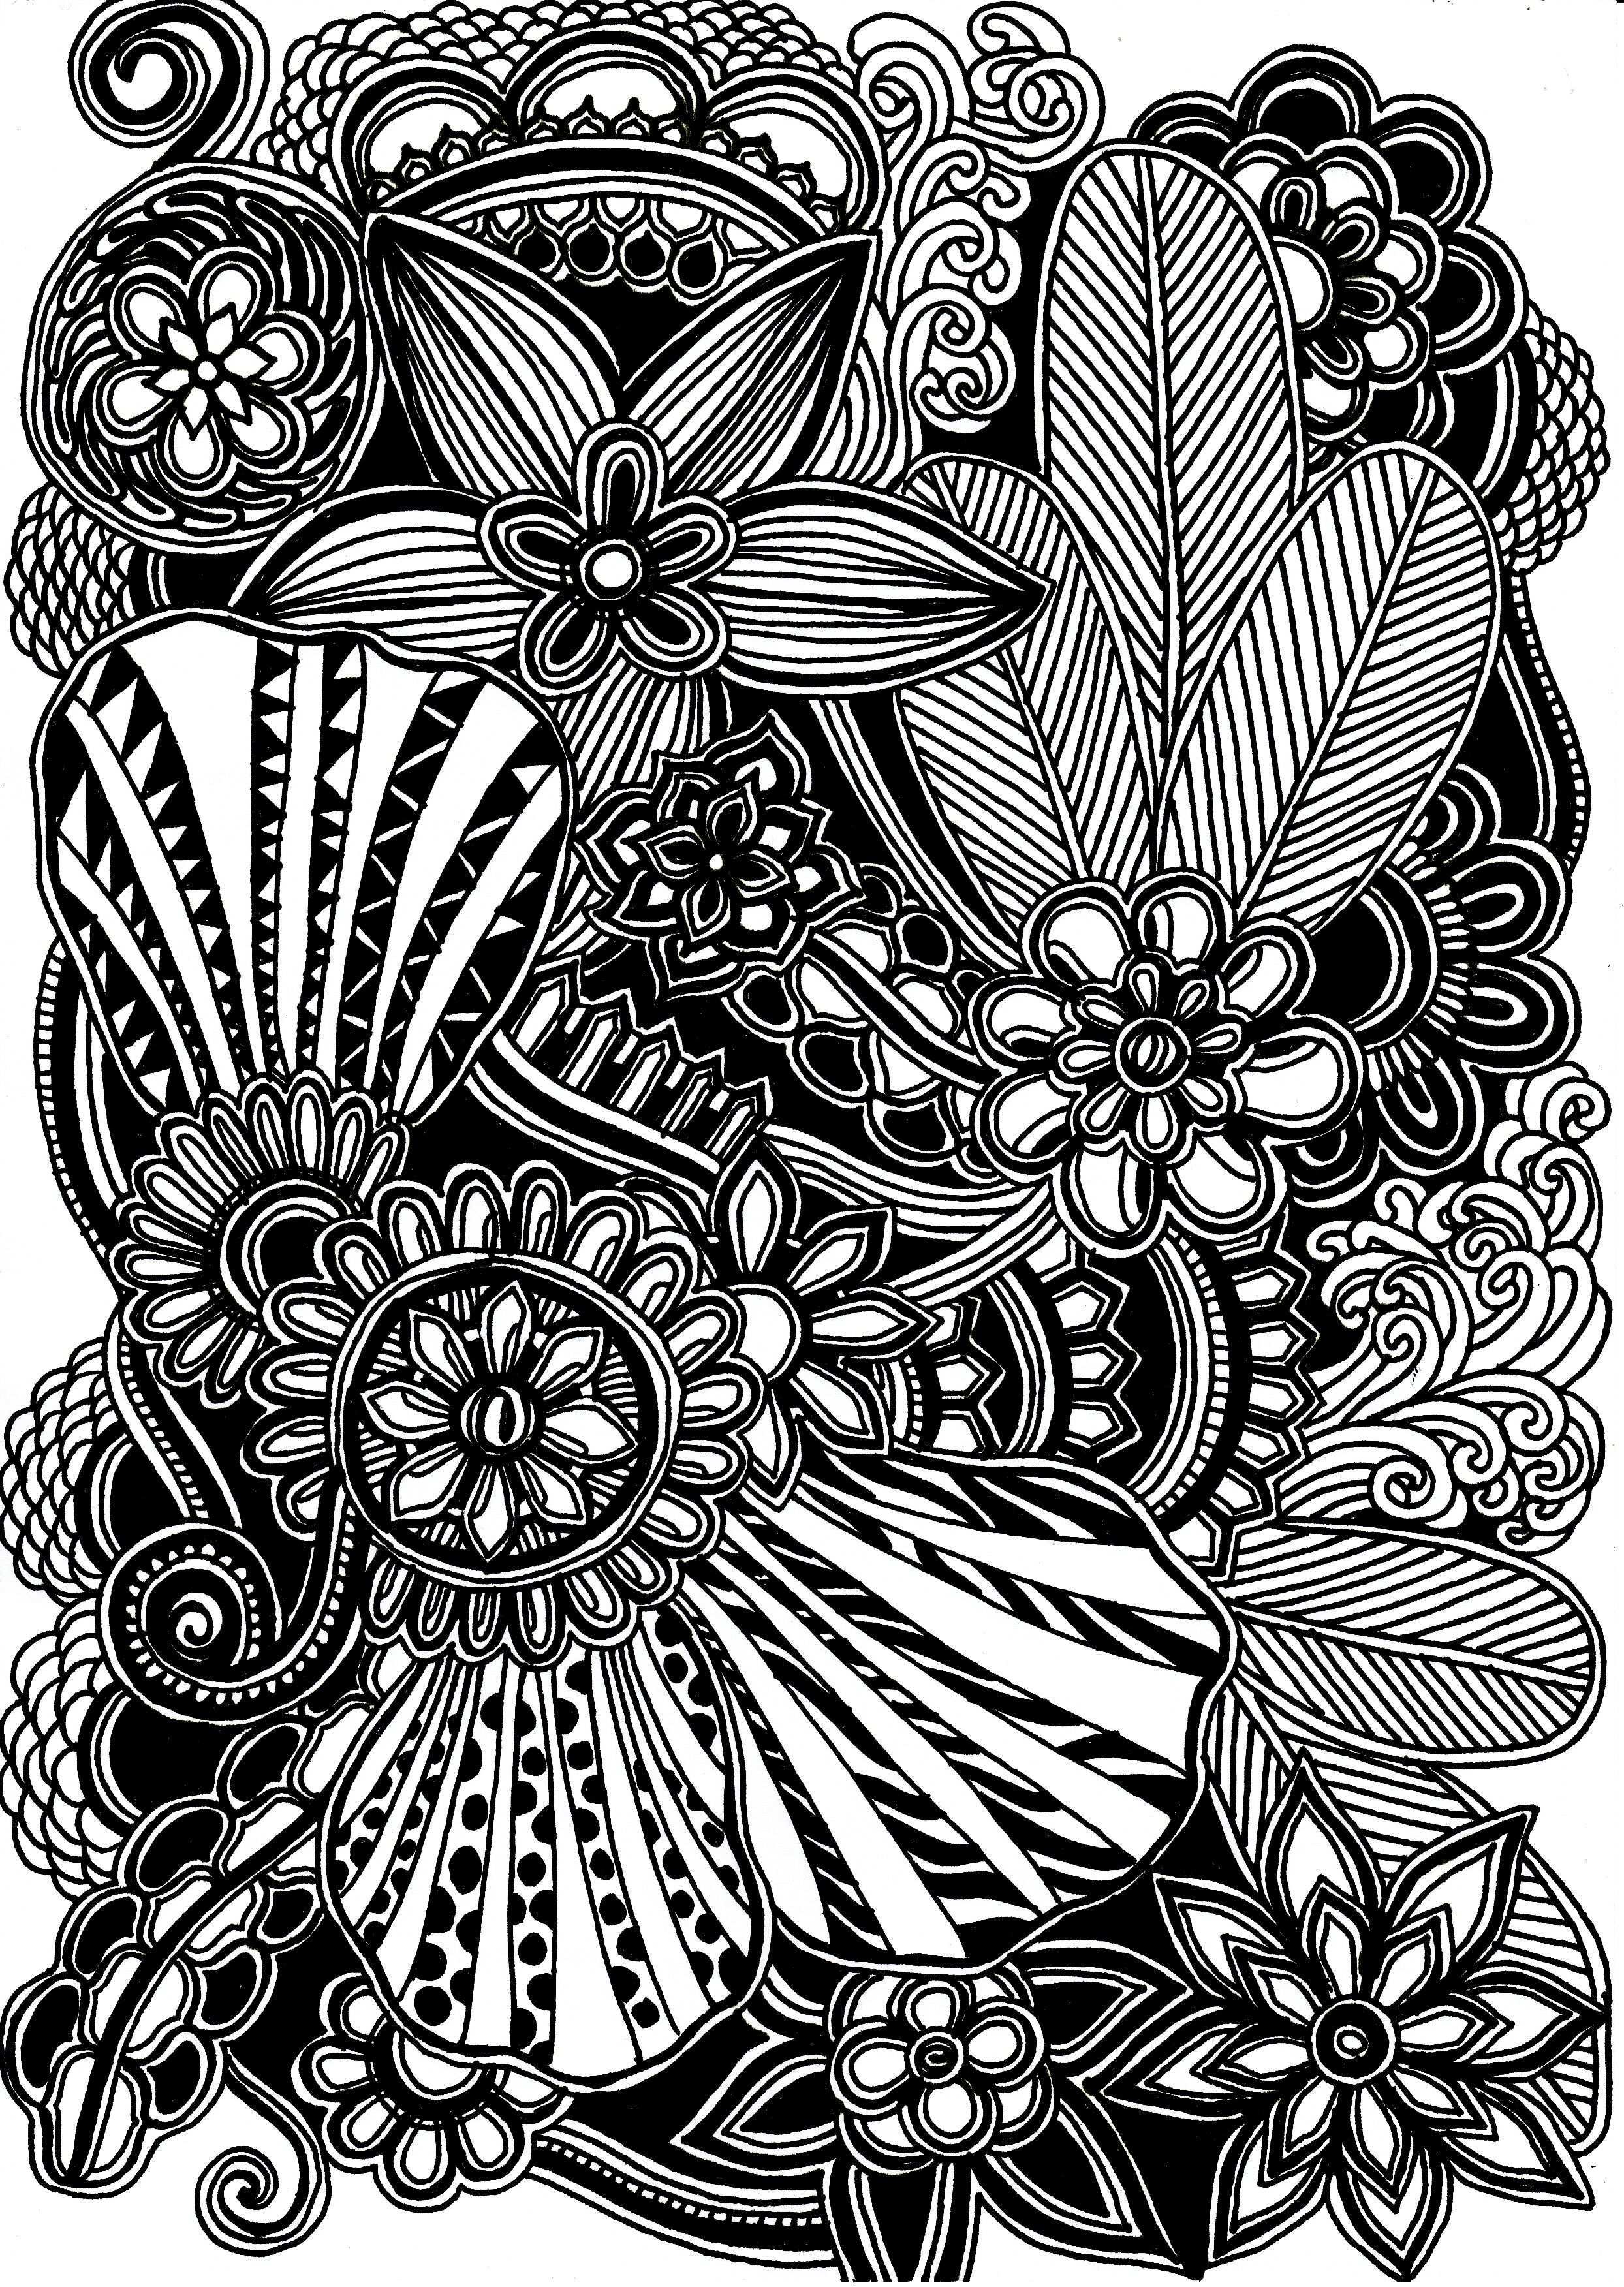 Black And White Drawing Using Pen Forest Black White Doodles Doodling Drawing Black A